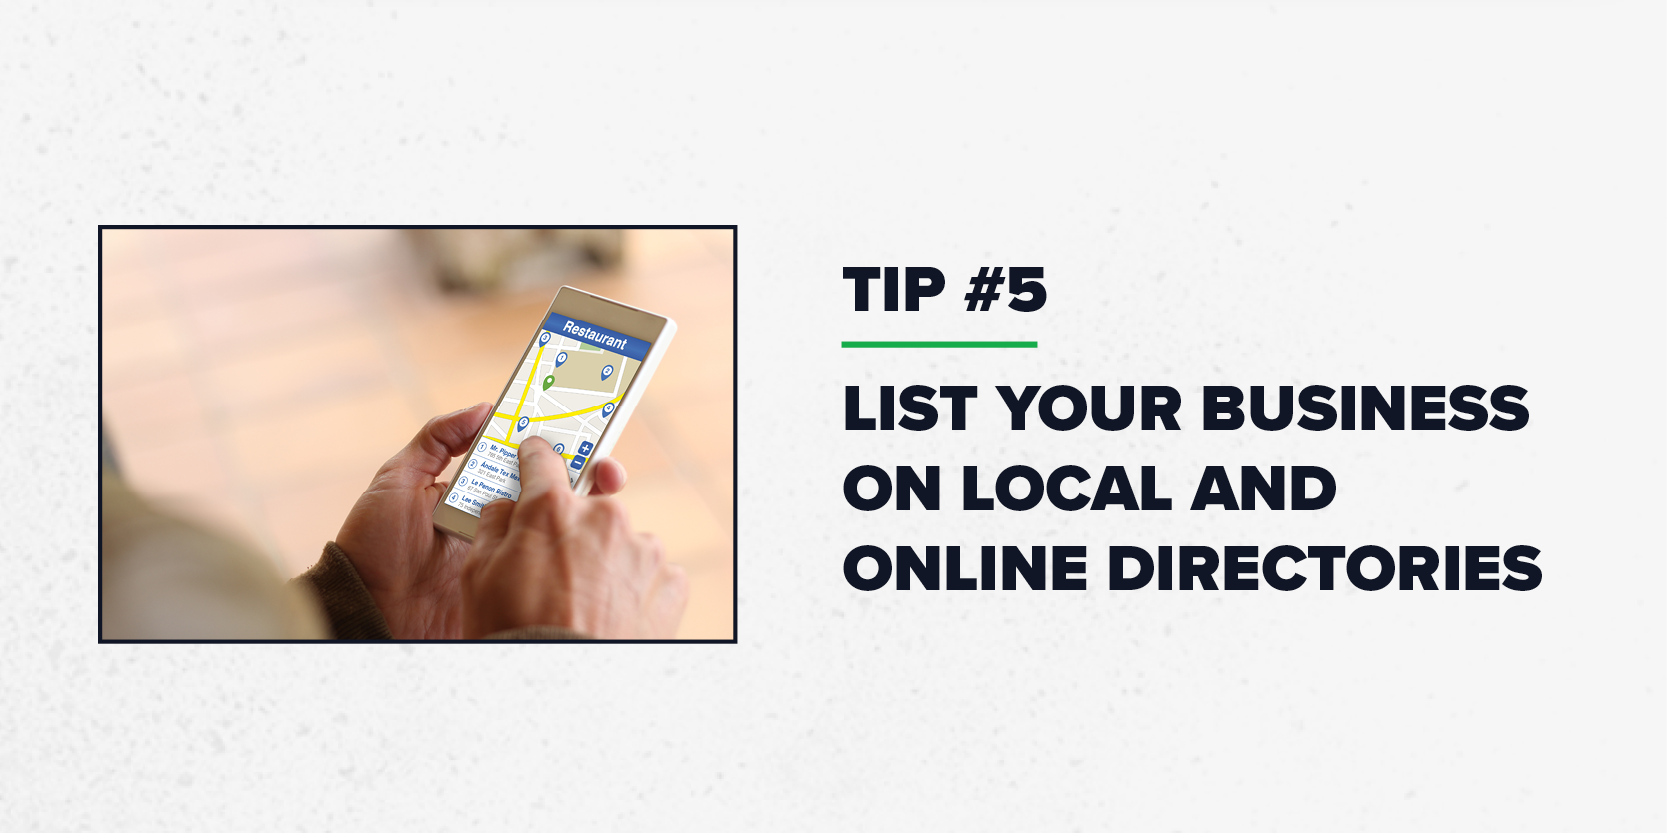 SAB Promoting Business Tips blog images - local and online directory listings